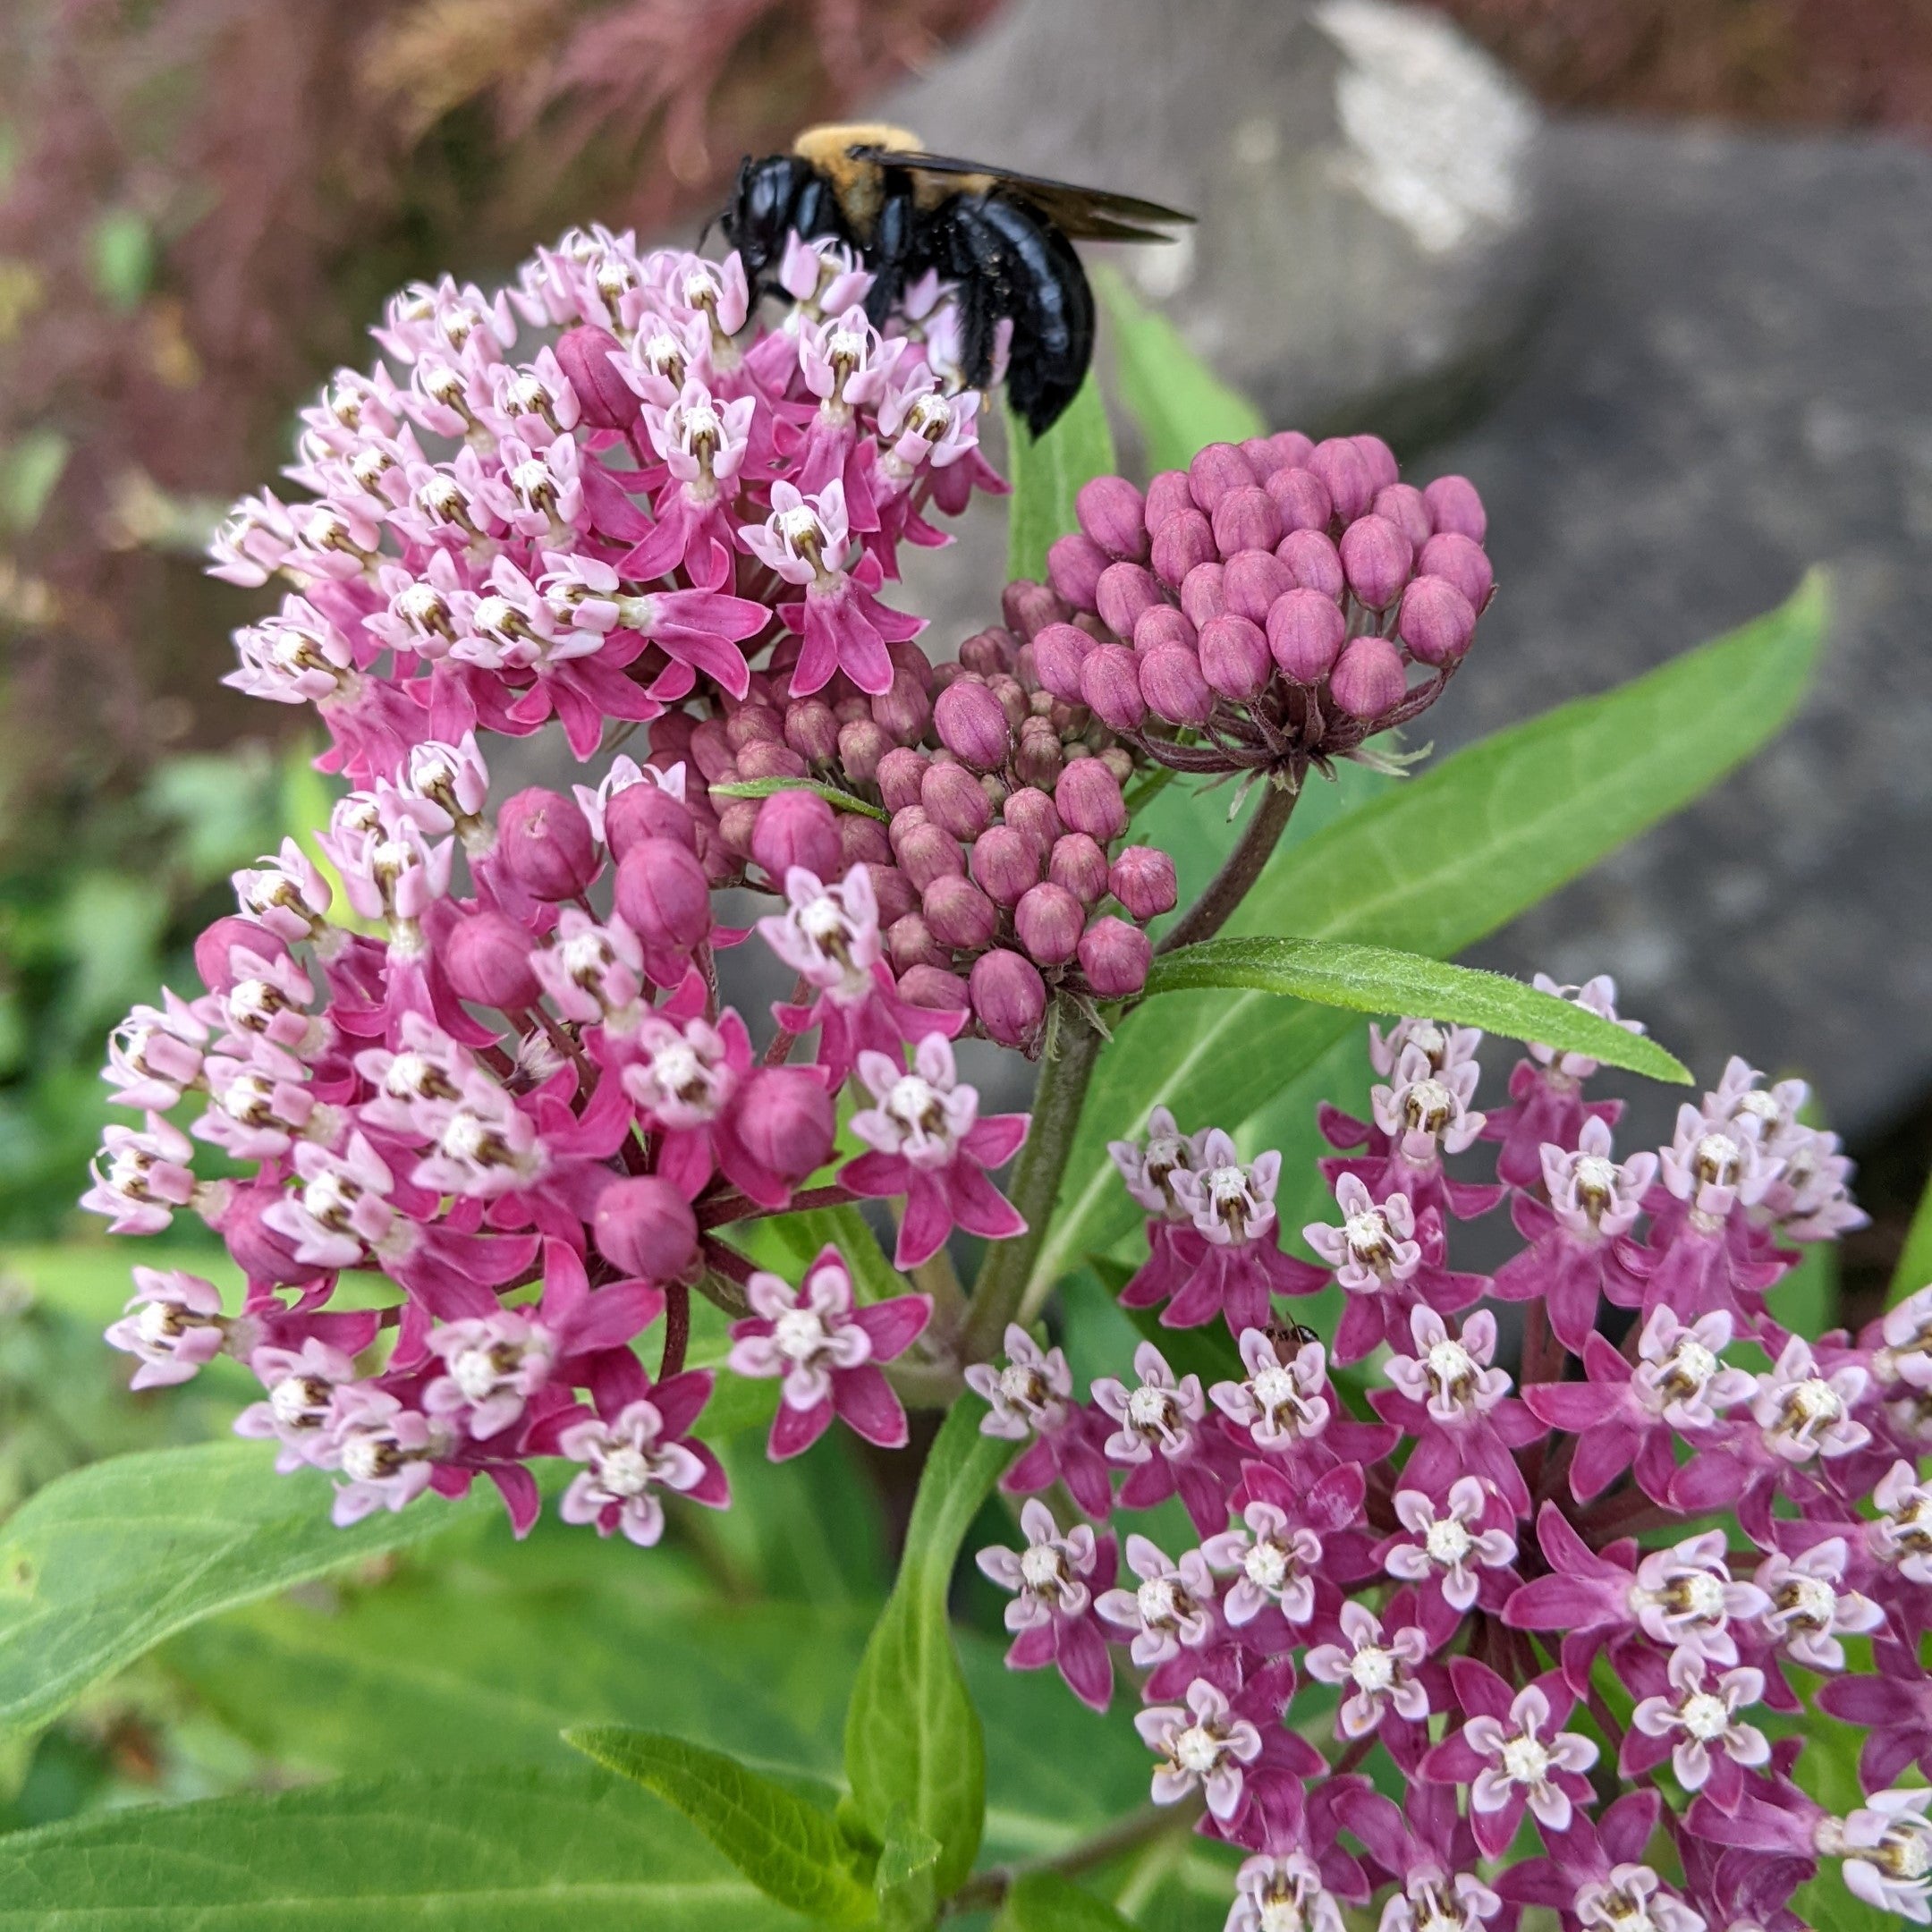 Asclepias incarnata Cinderella Milk Weed Butterfly Weed Image Credit: Chaz Morenz 20230718